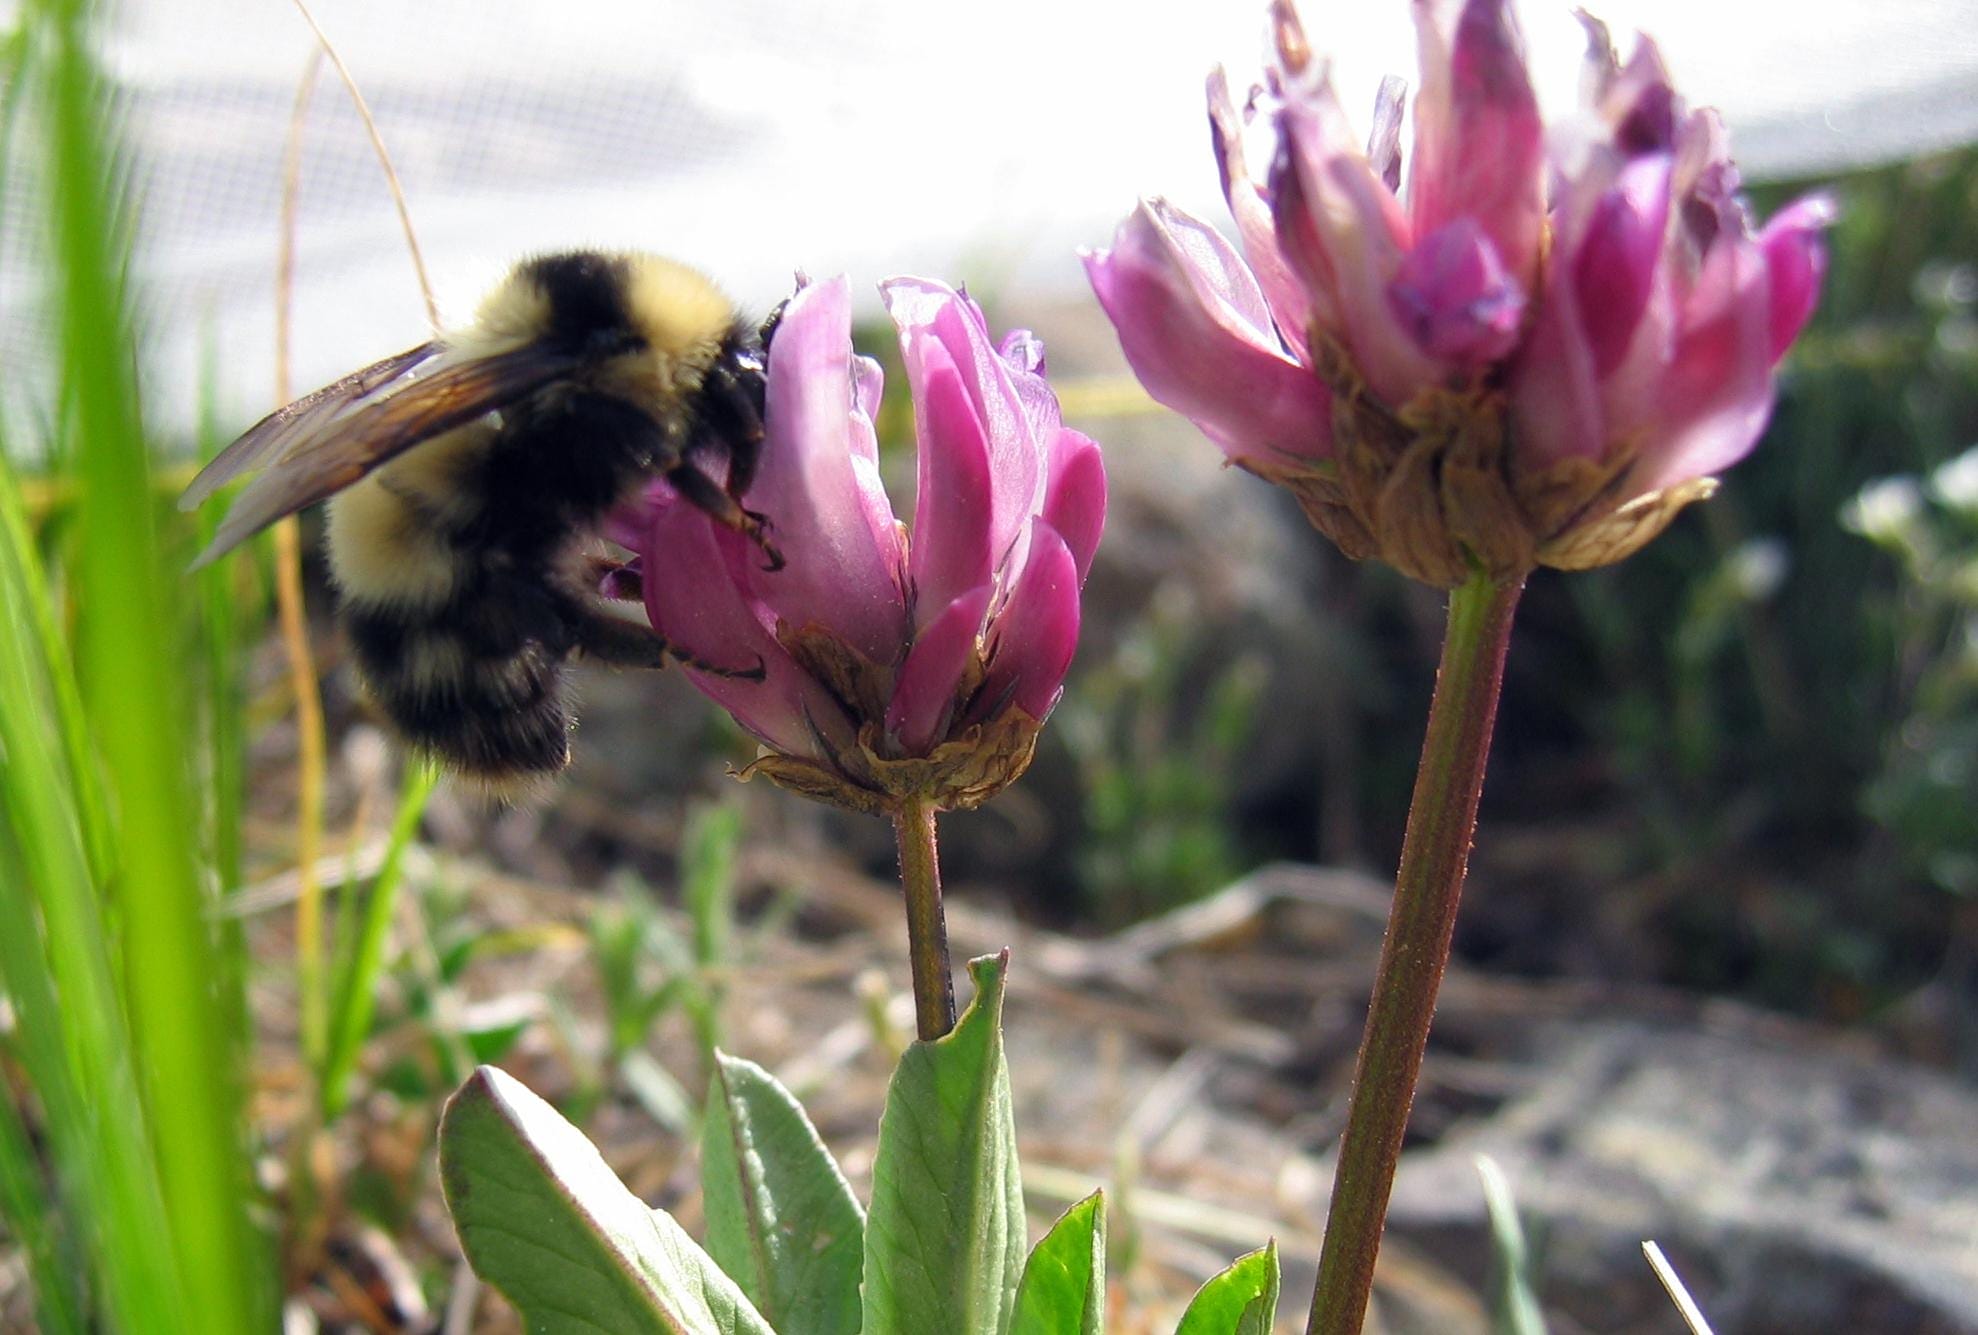 A bumblebee queen collects nectar from alpine clover.